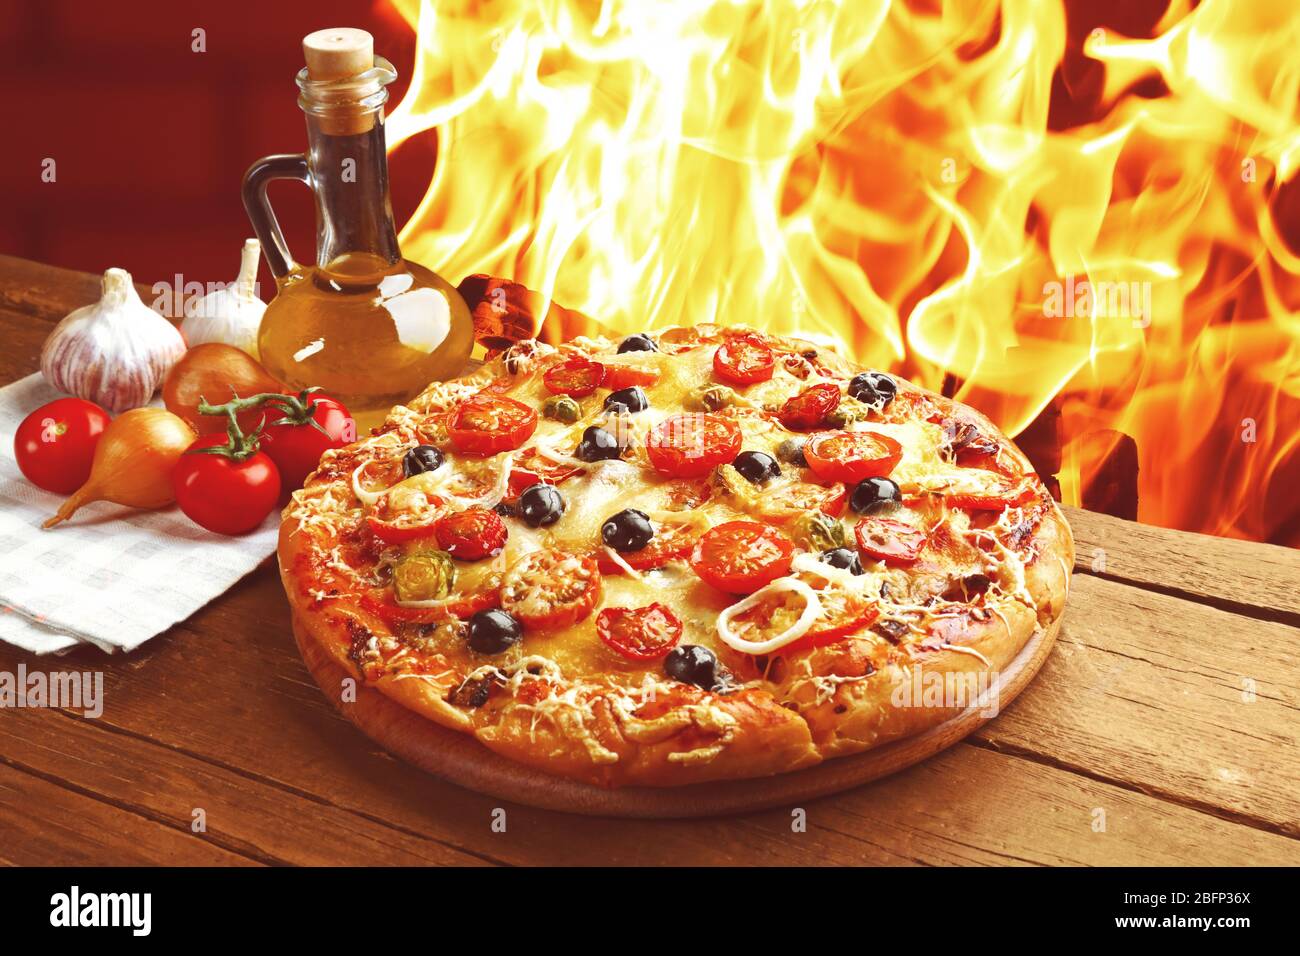 Delicious fresh pizza on wooden table against fire flame background Stock Photo